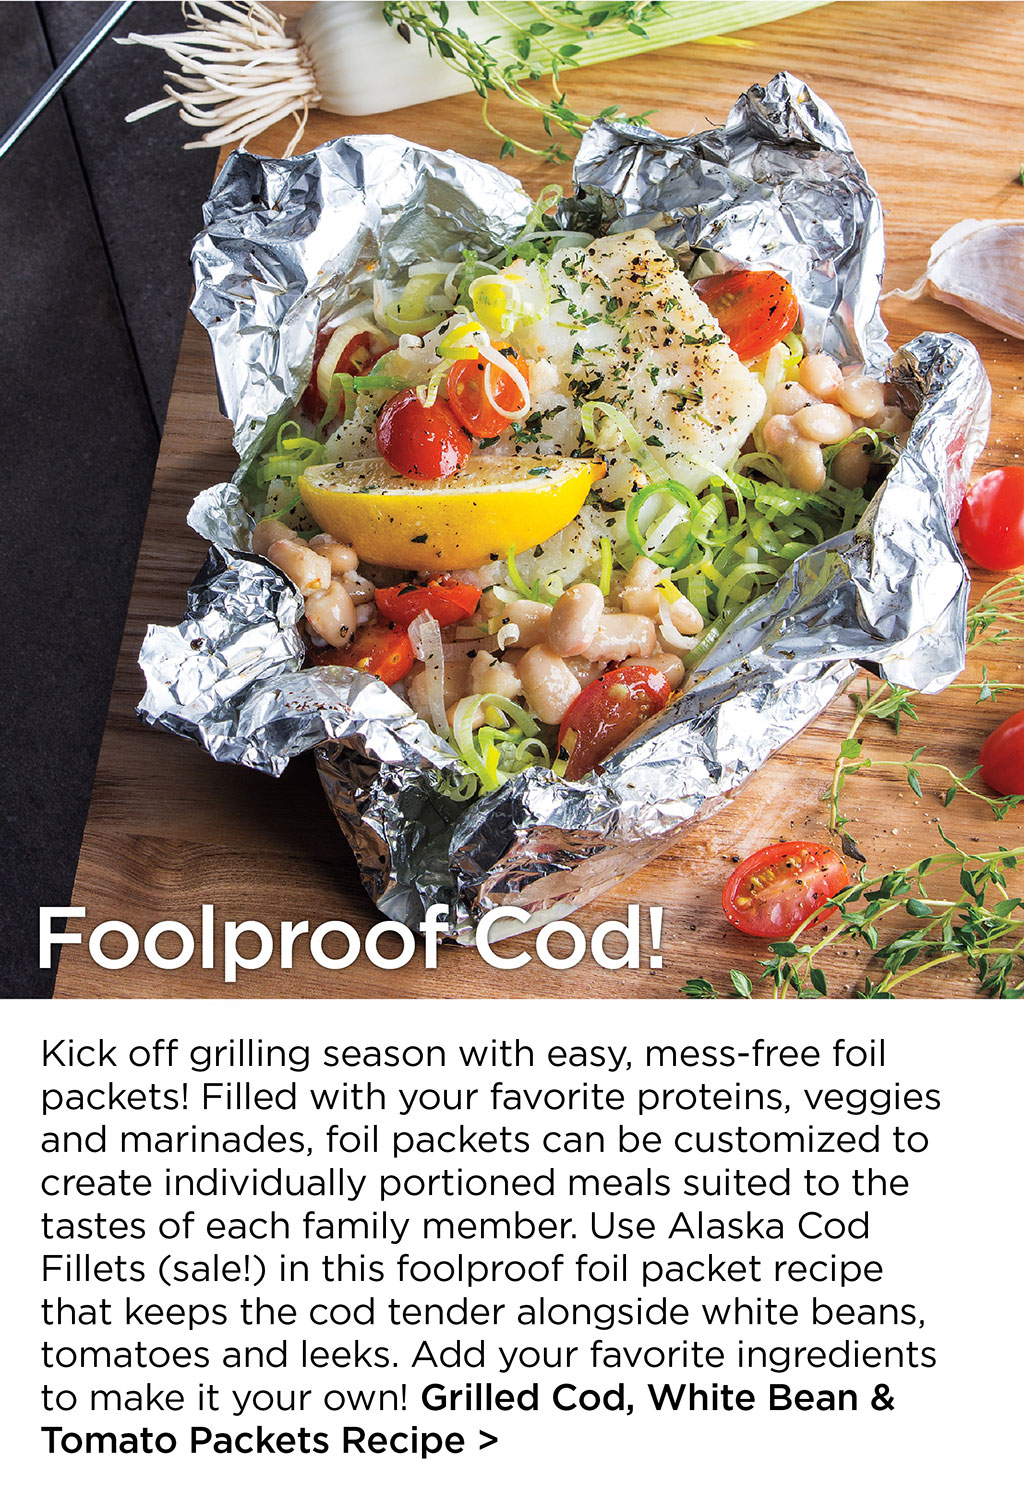 Foolproof Cod! - Kick off grilling season with easy, mess-free foil packets! Filled with your favorite proteins, veggies and marinades, foil packets can be customized to create individually portioned meals suited to the tastes of each family member. Use Alaska Cod Fillets (sale!) in this foolproof foil packet recipe that keeps the cod tender alongside white beans, tomatoes and leeks. Add your favorite ingredients to make it your own! Grilled Cod, White Bean & Tomato Packets Recipe >